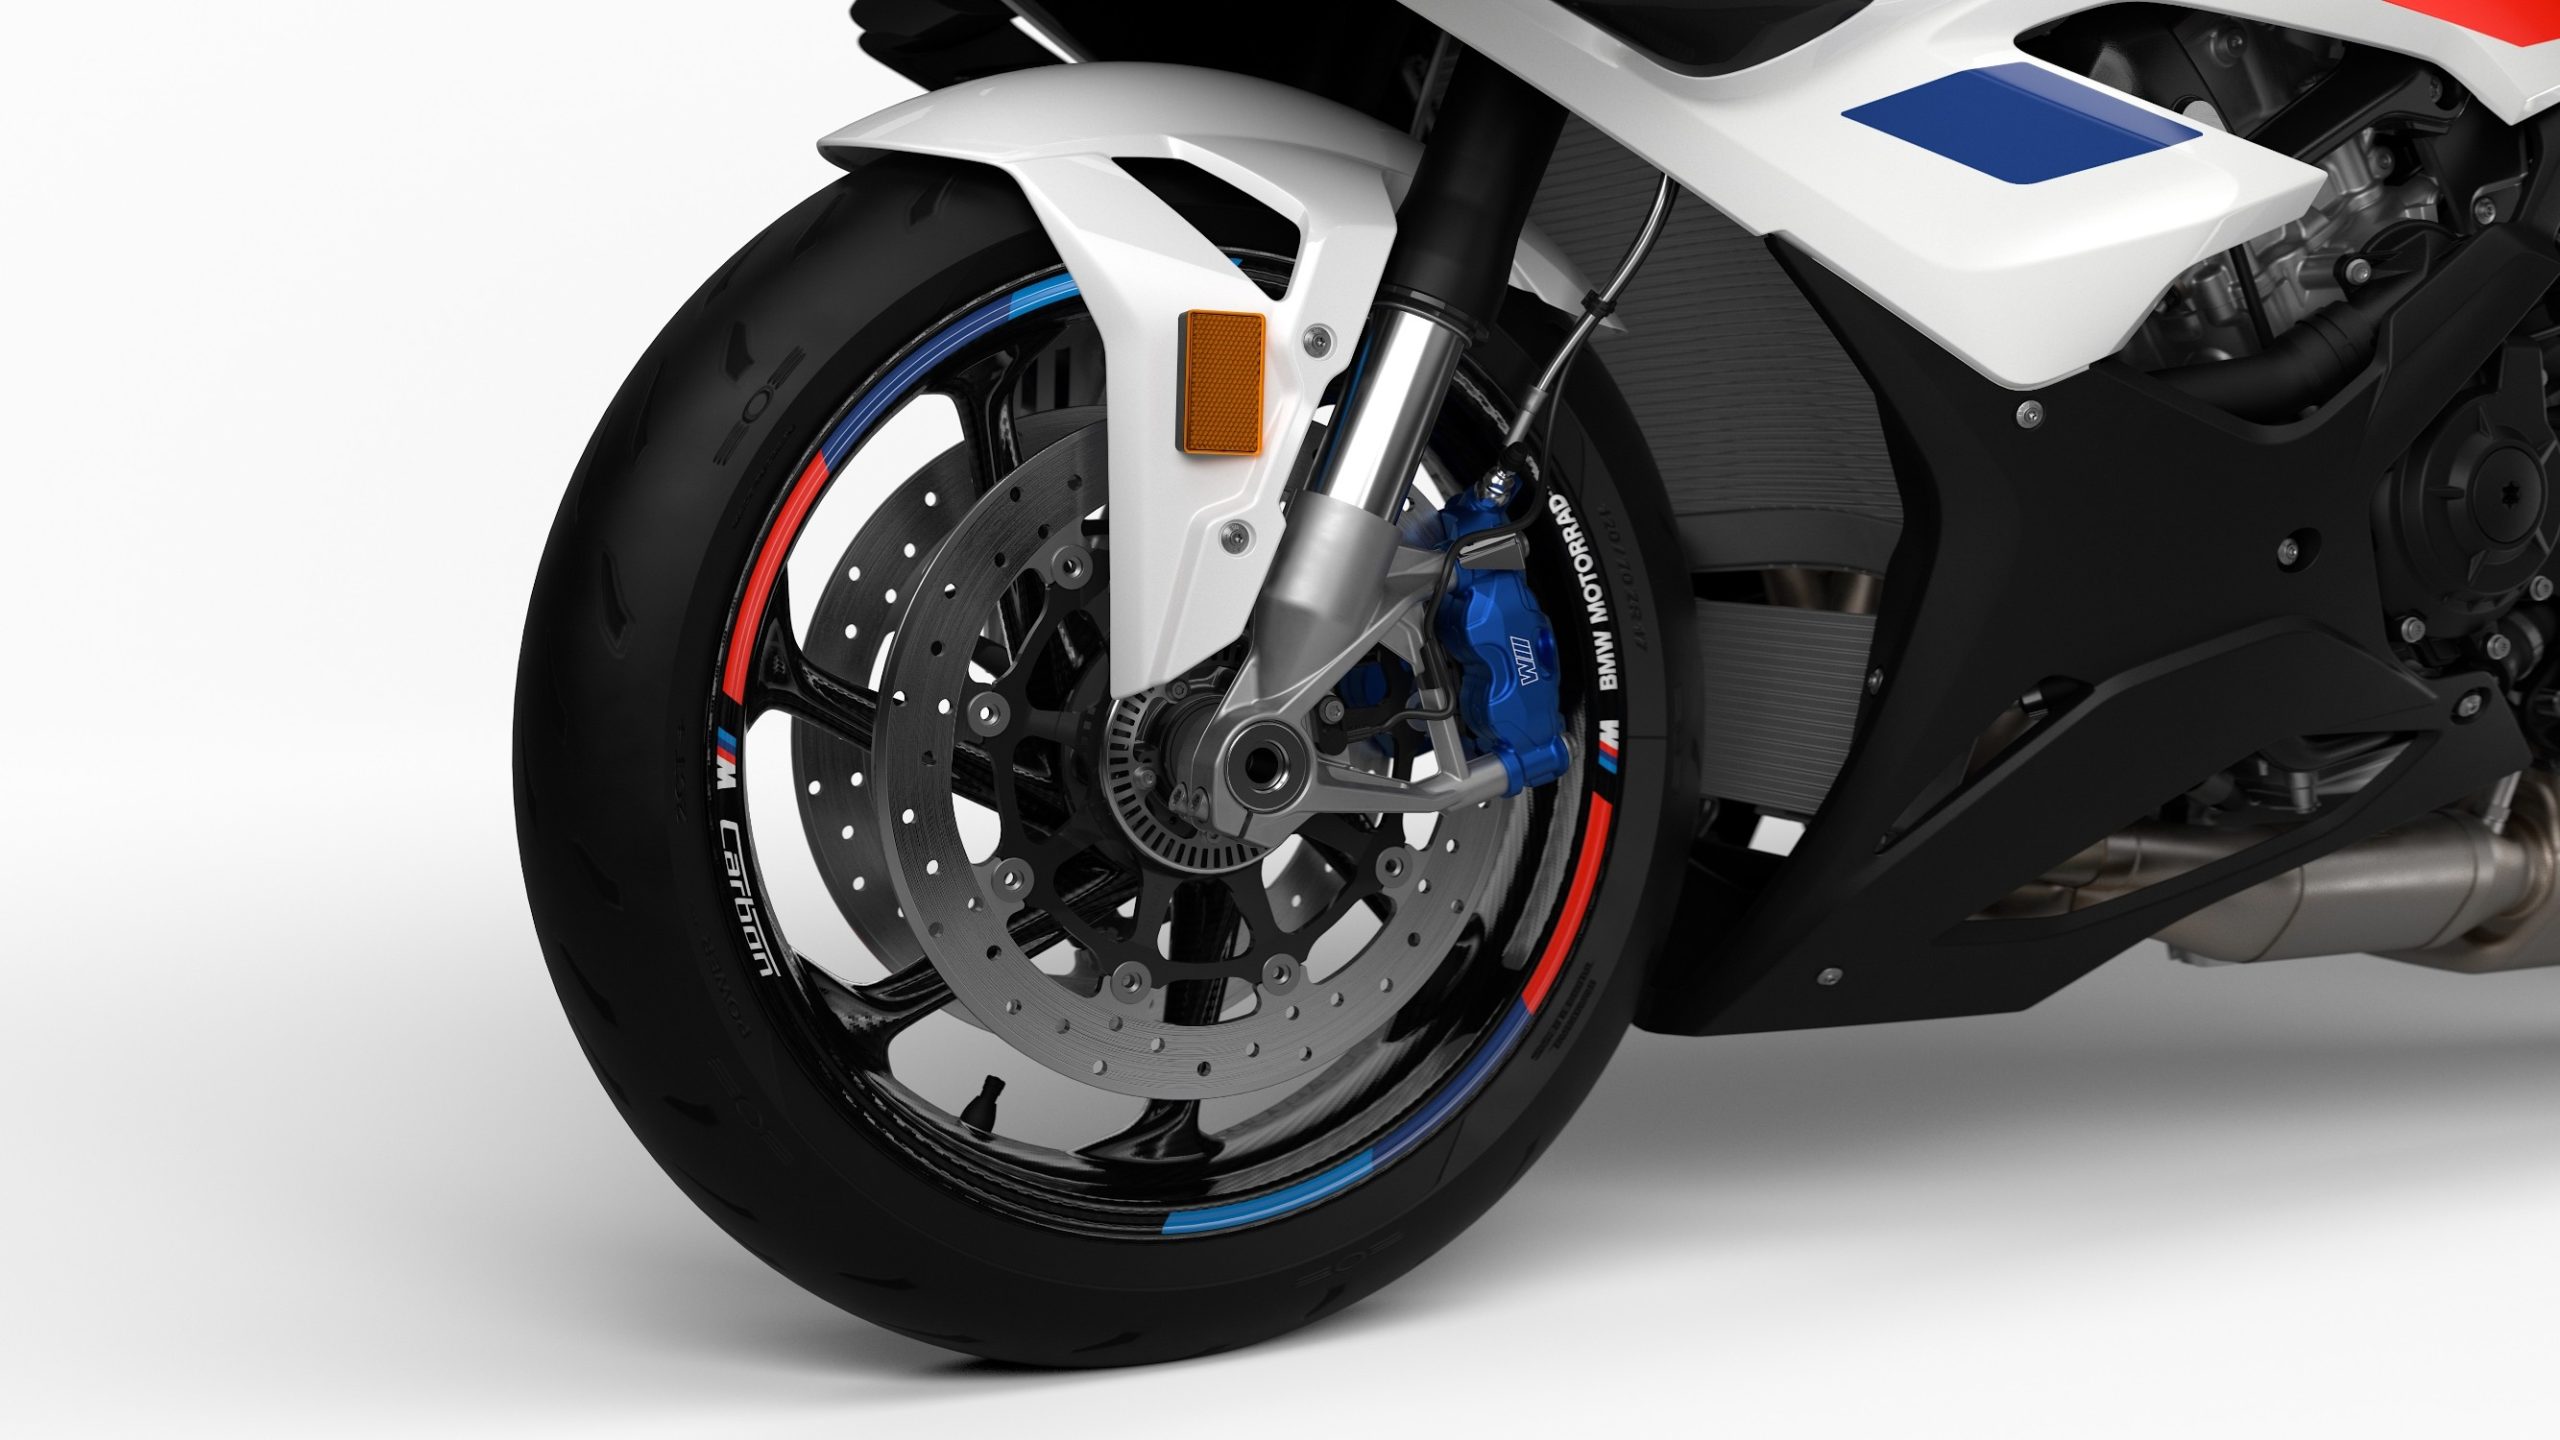 P90480032_lowRes_the-new-bmw-s-1000-r